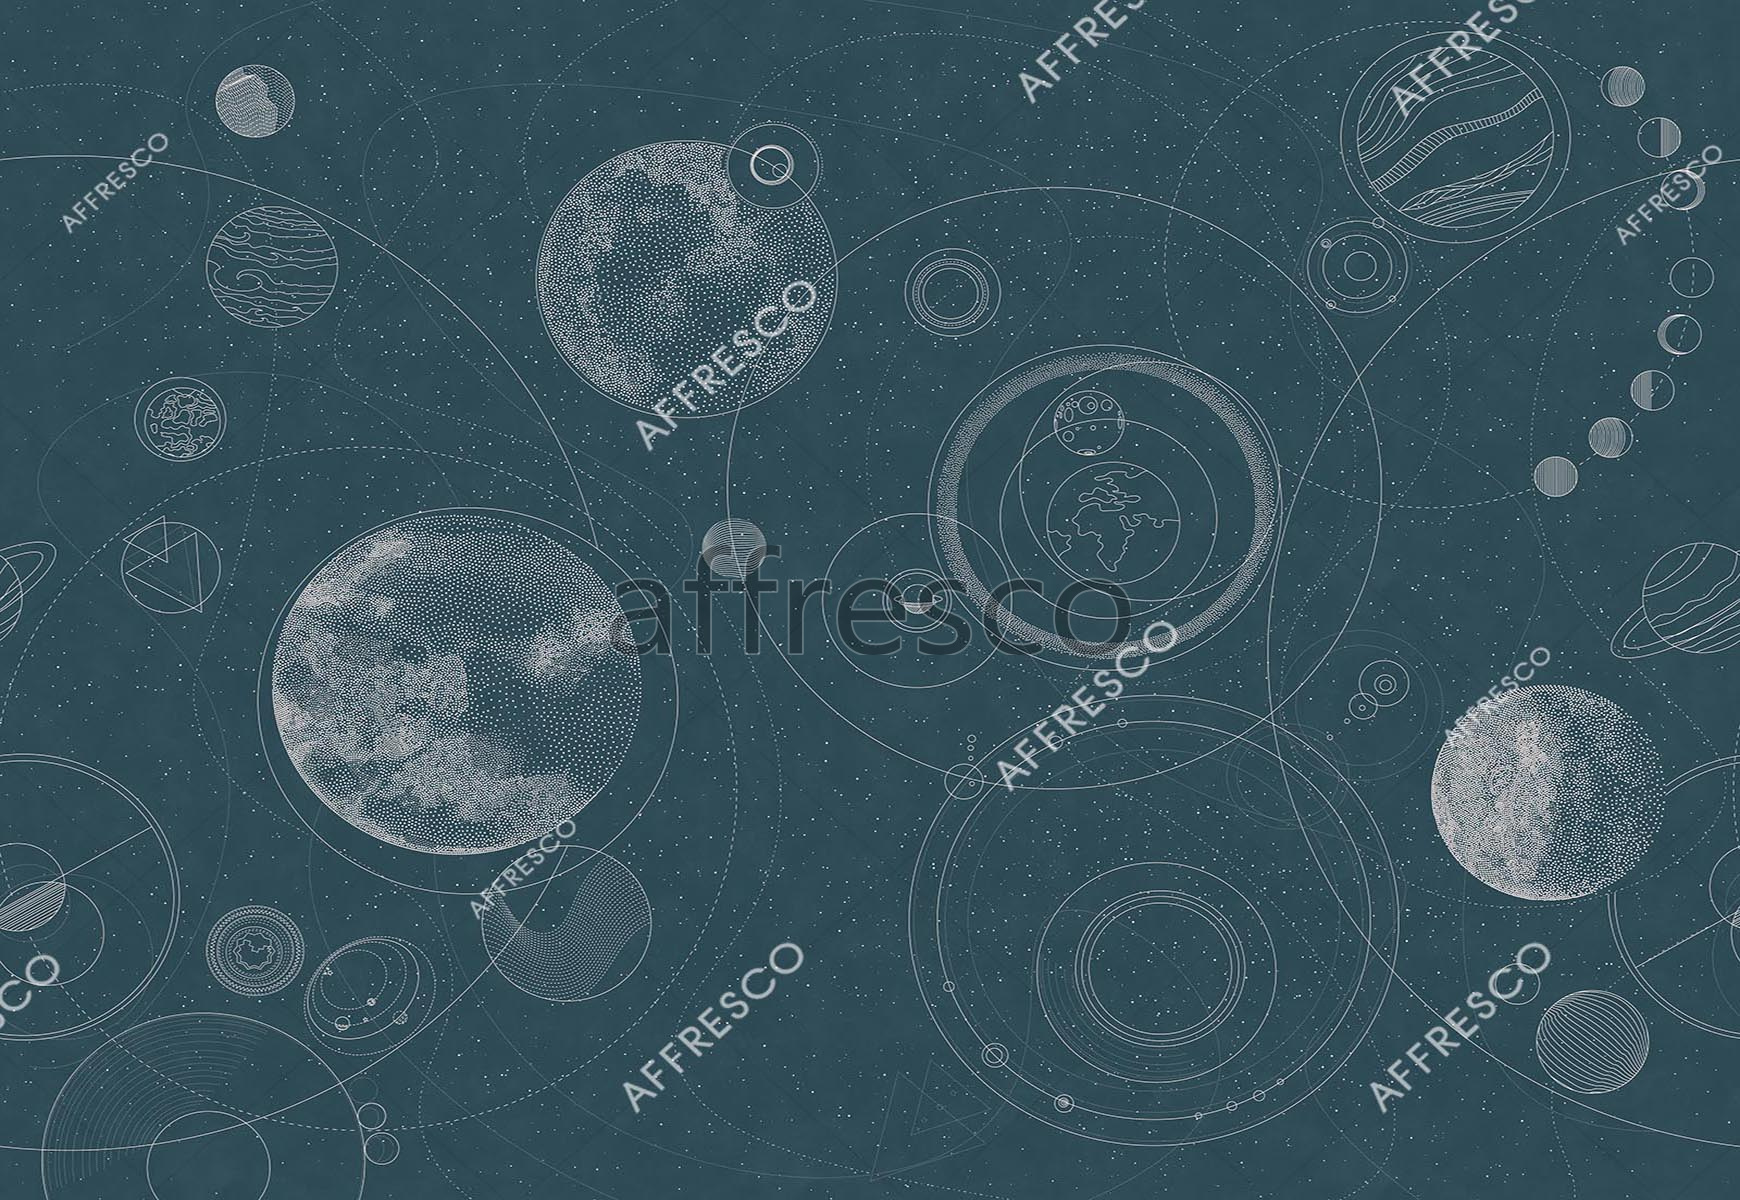 ID139198 | Geometry | The parade of planets | Affresco Factory